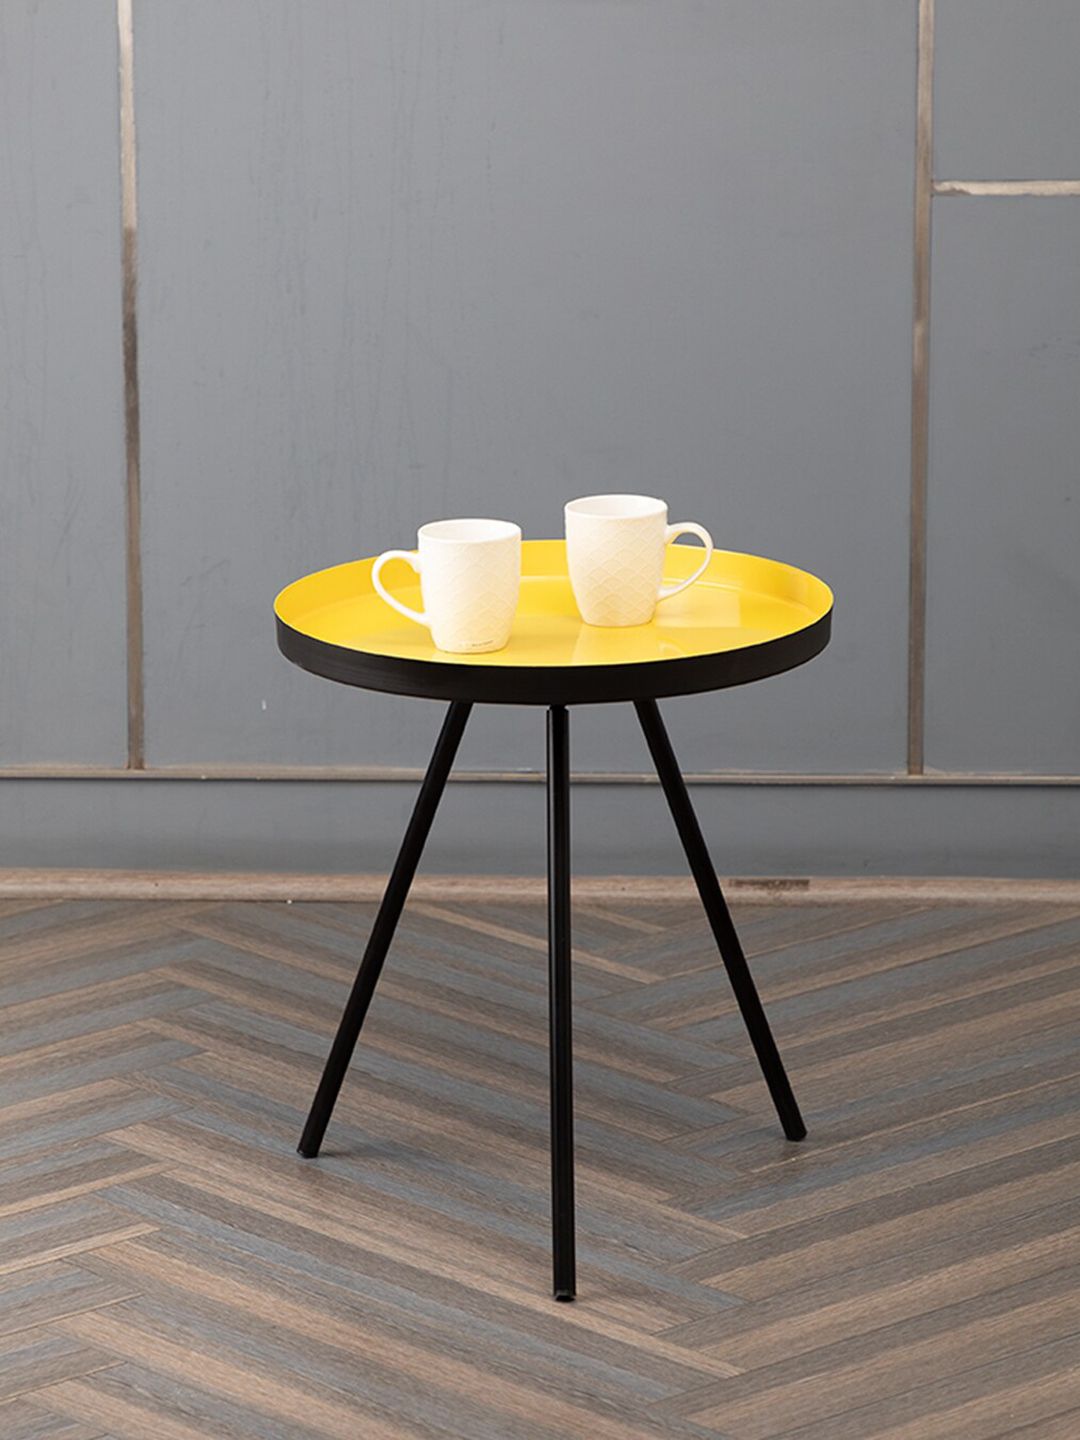 MARKET99 Yellow & Black Metal Round Side Table Price in India